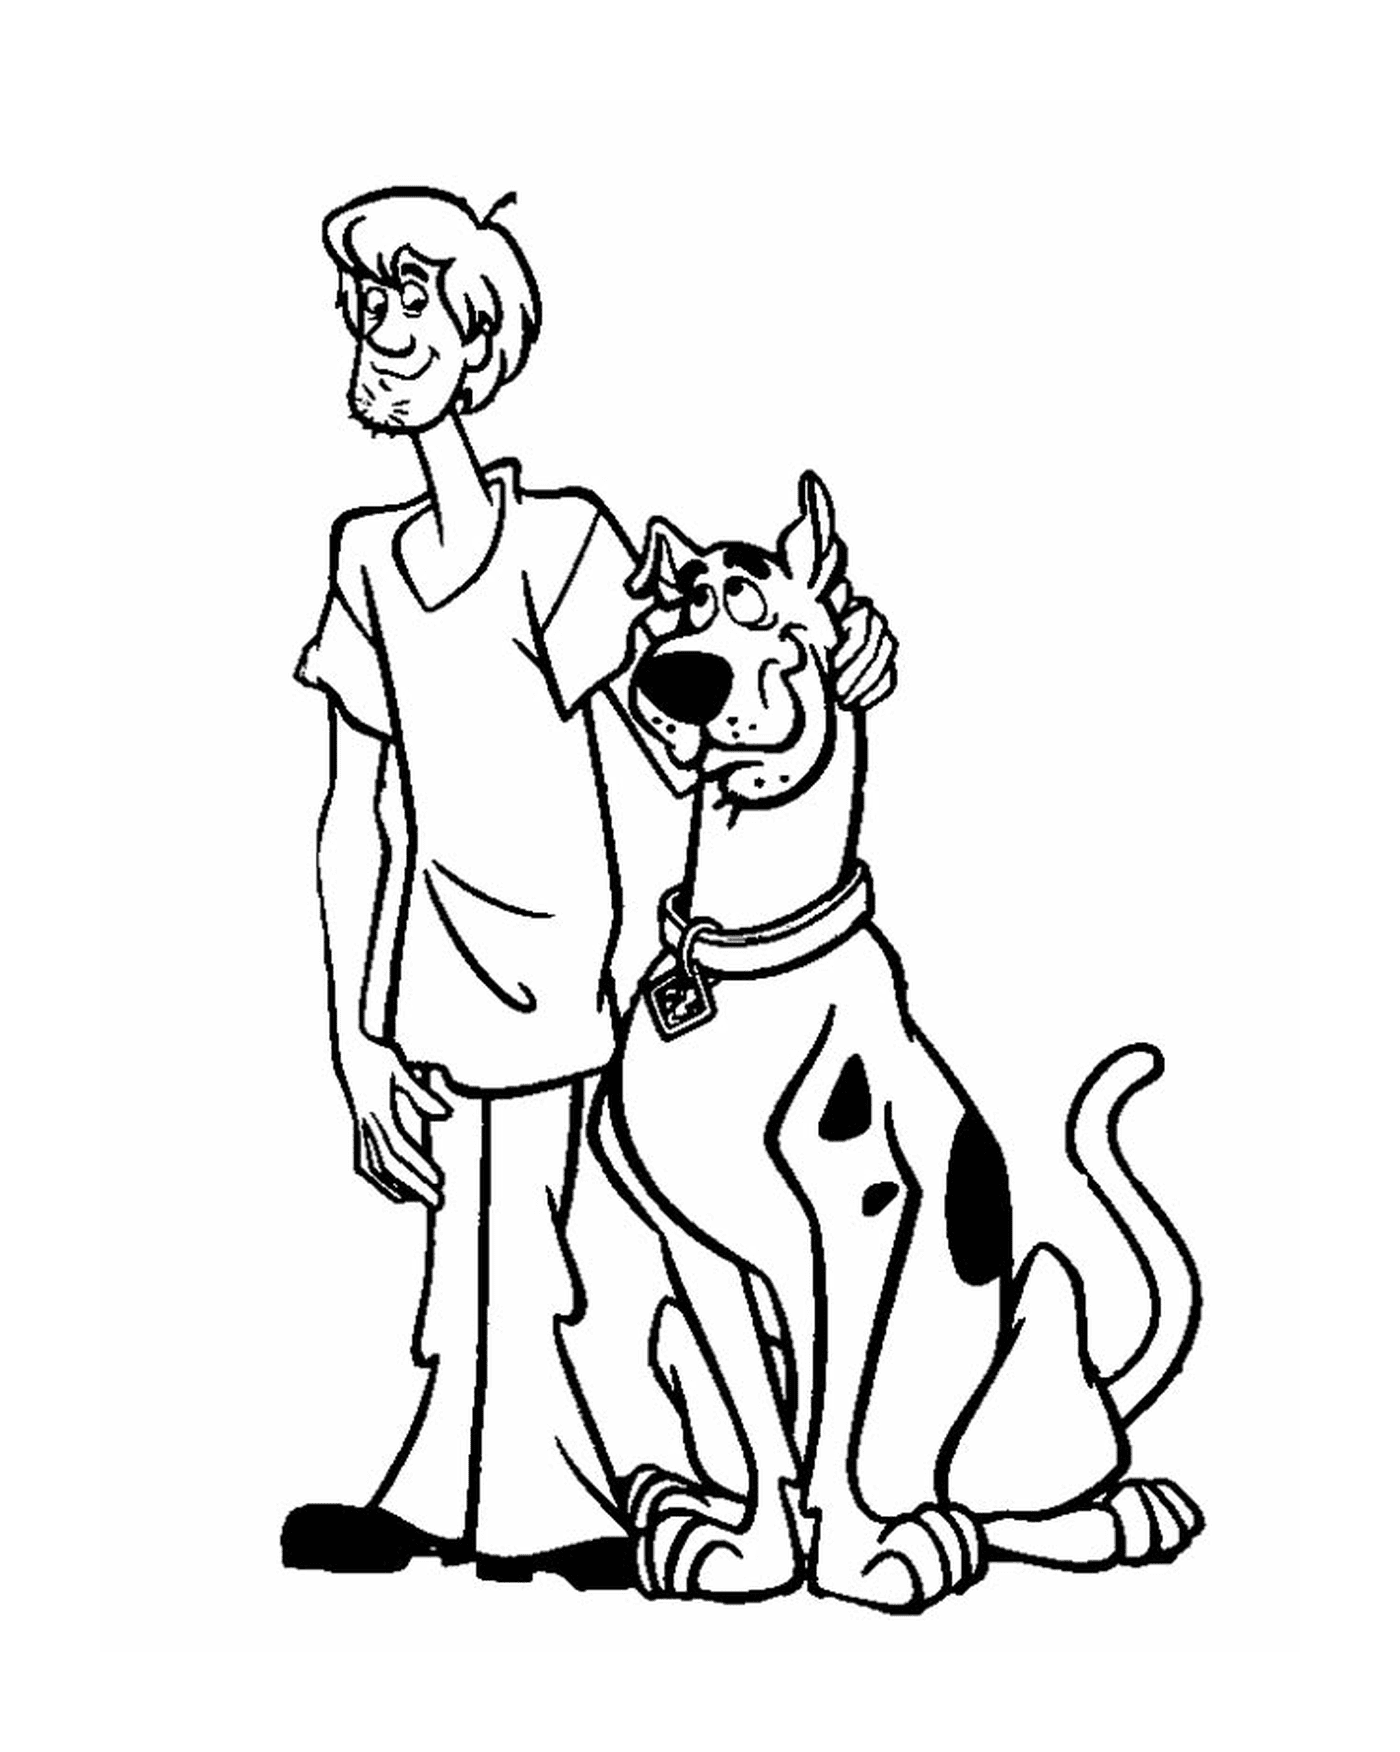  A man and a dog 